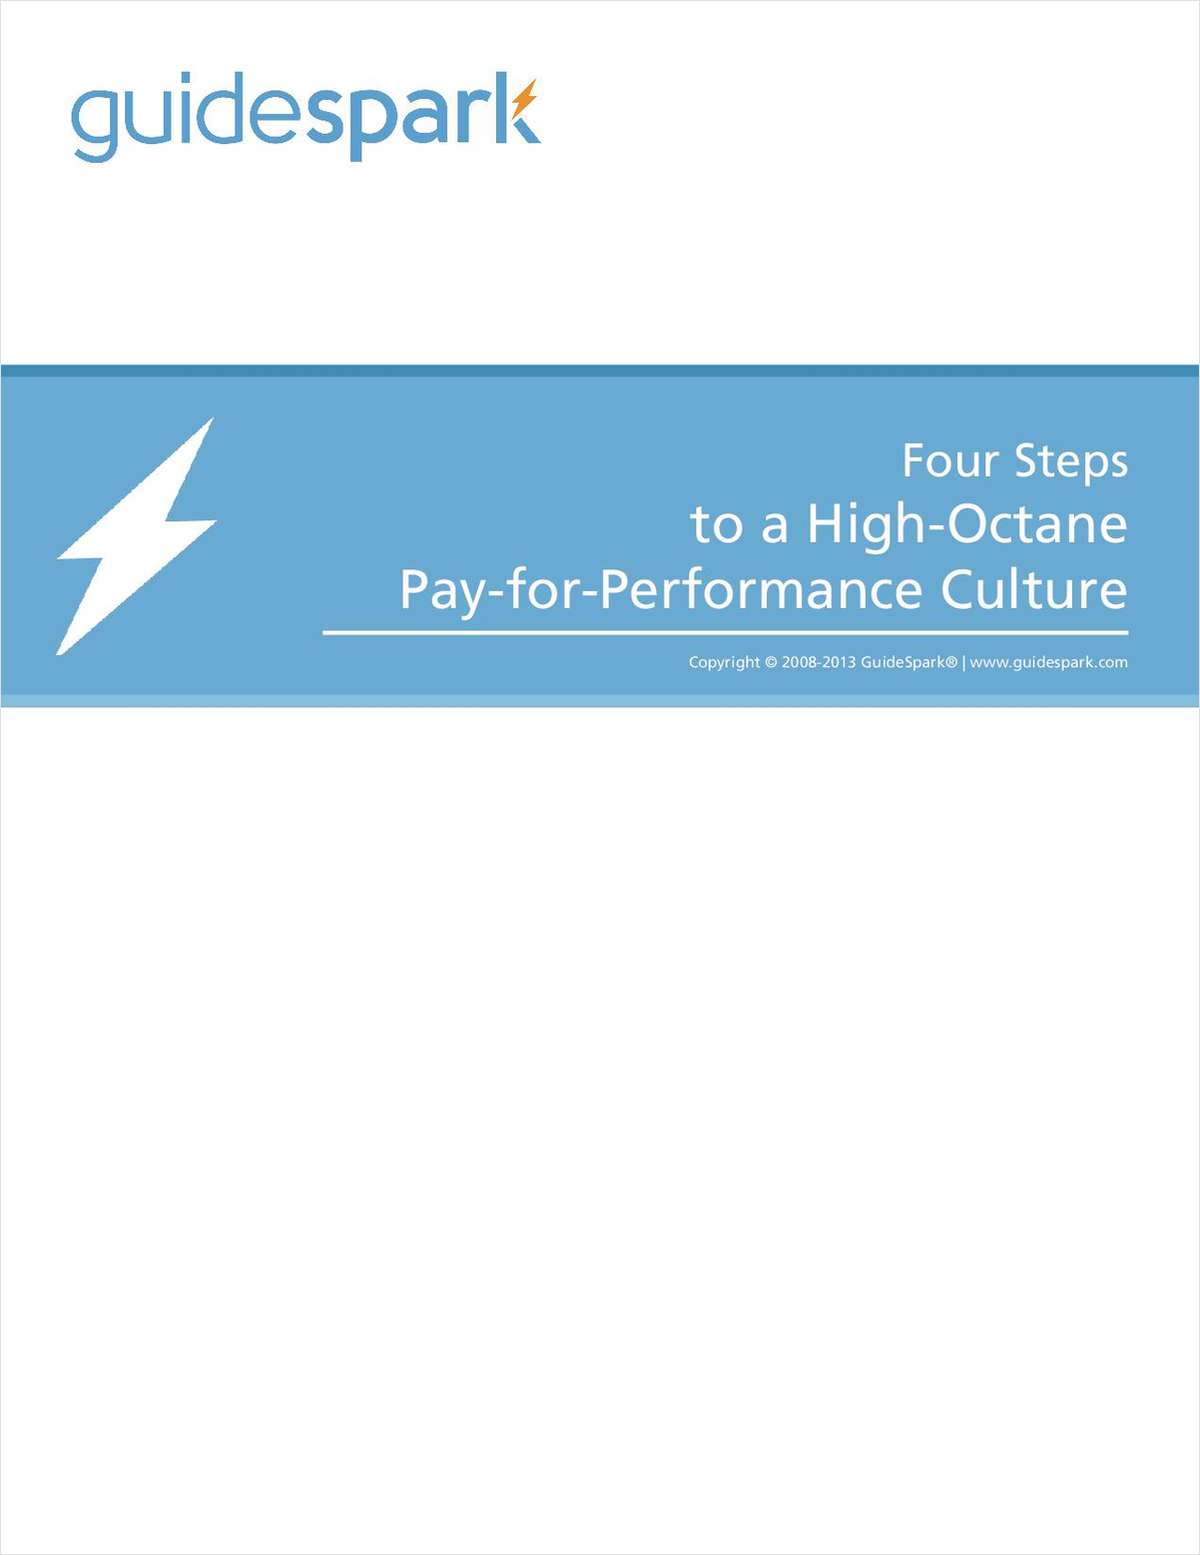 Four Steps to a High-Octane Pay-for-Performance Culture